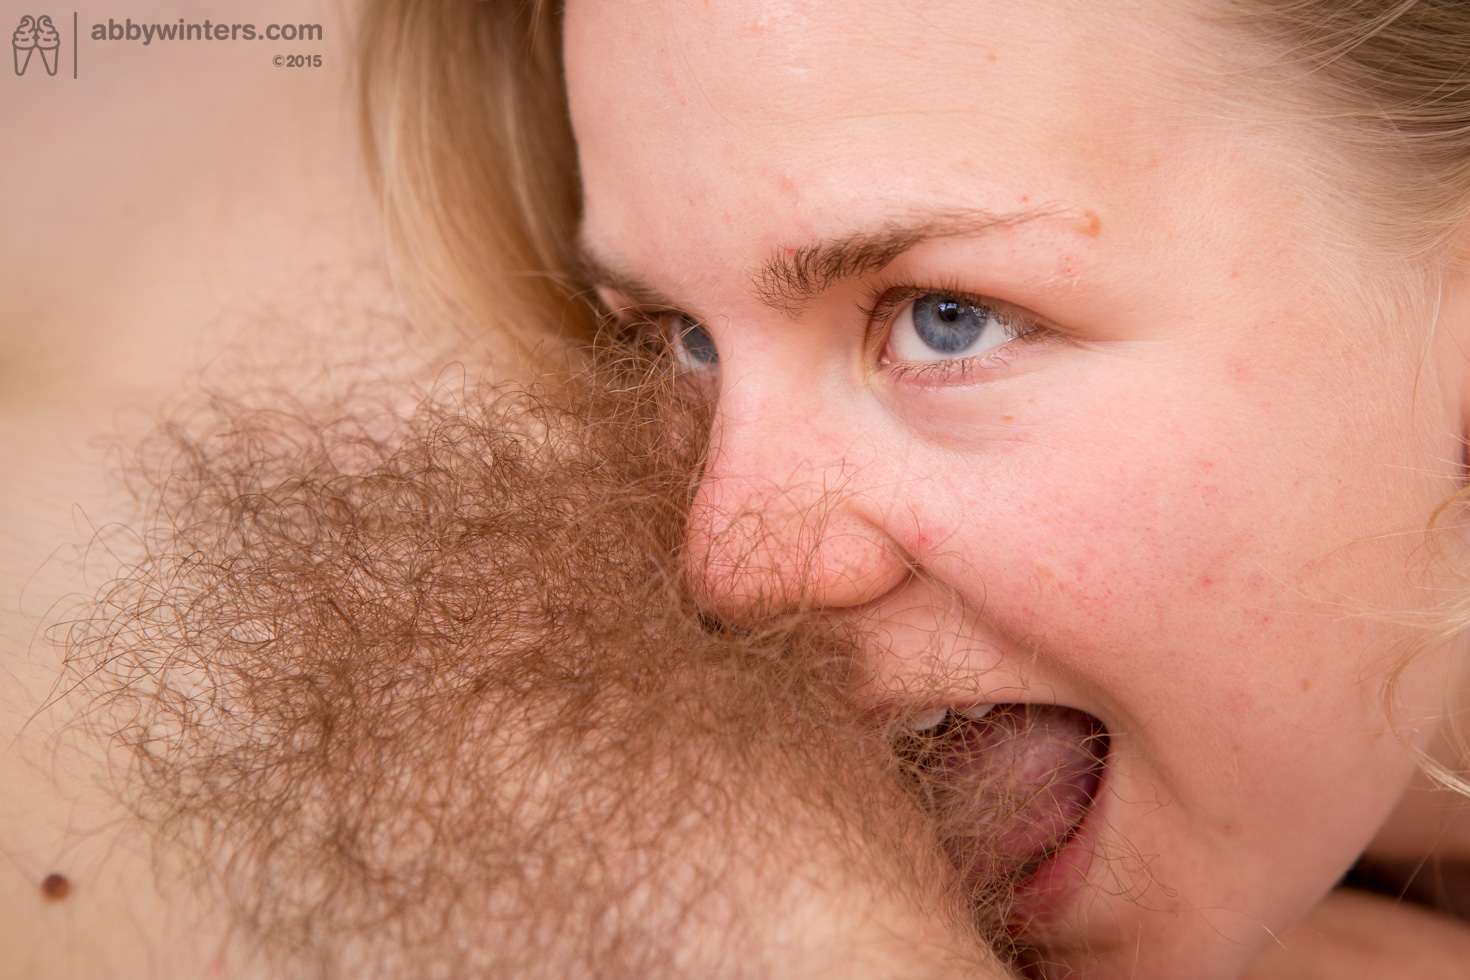 Fisting Pussy Lesbian With Hea - Fisting hairy pussy | The Hairy Lady Blog